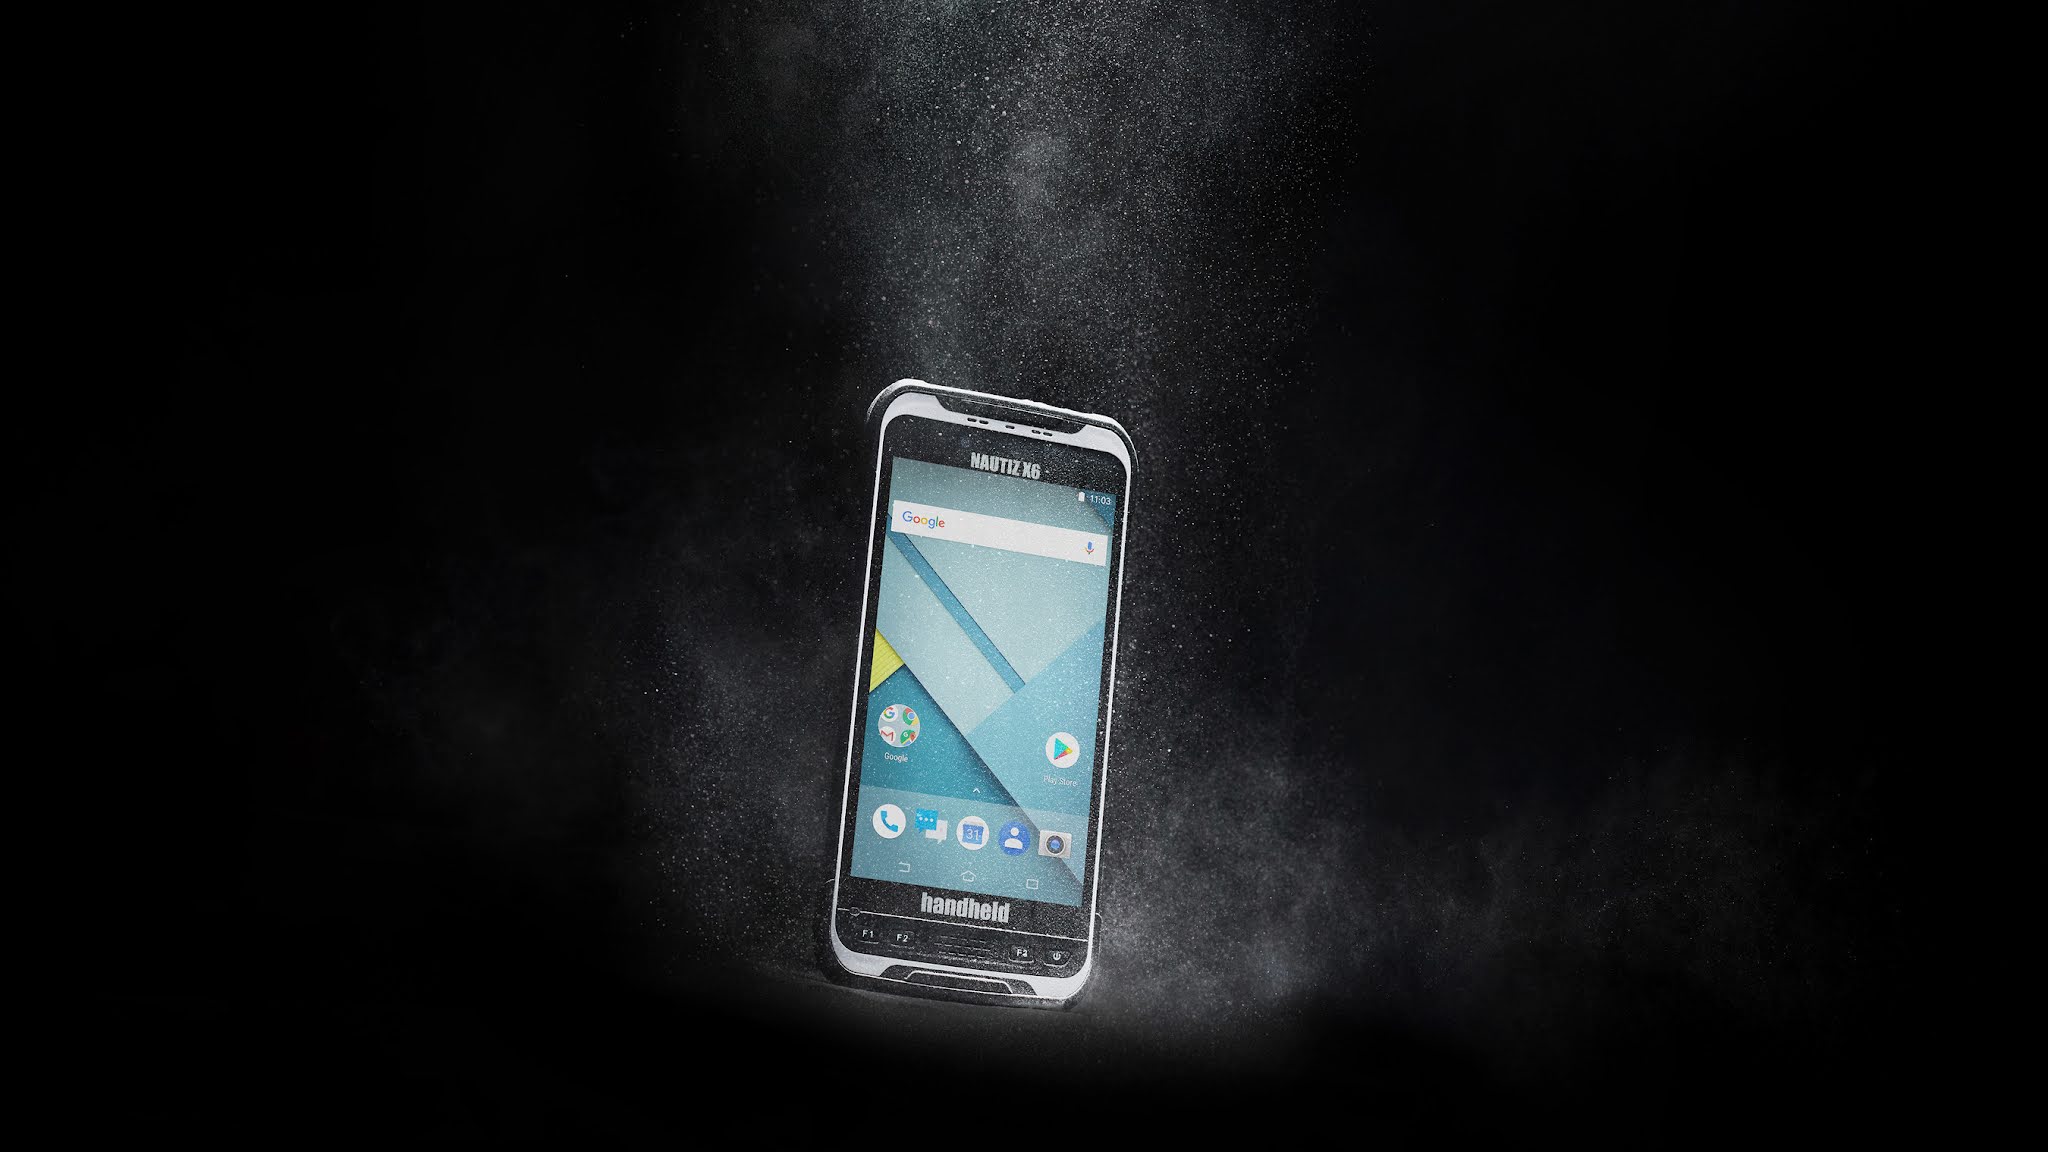 Handheld announces new version of the NAUTIZ X6 ultra-rugged Android phablet